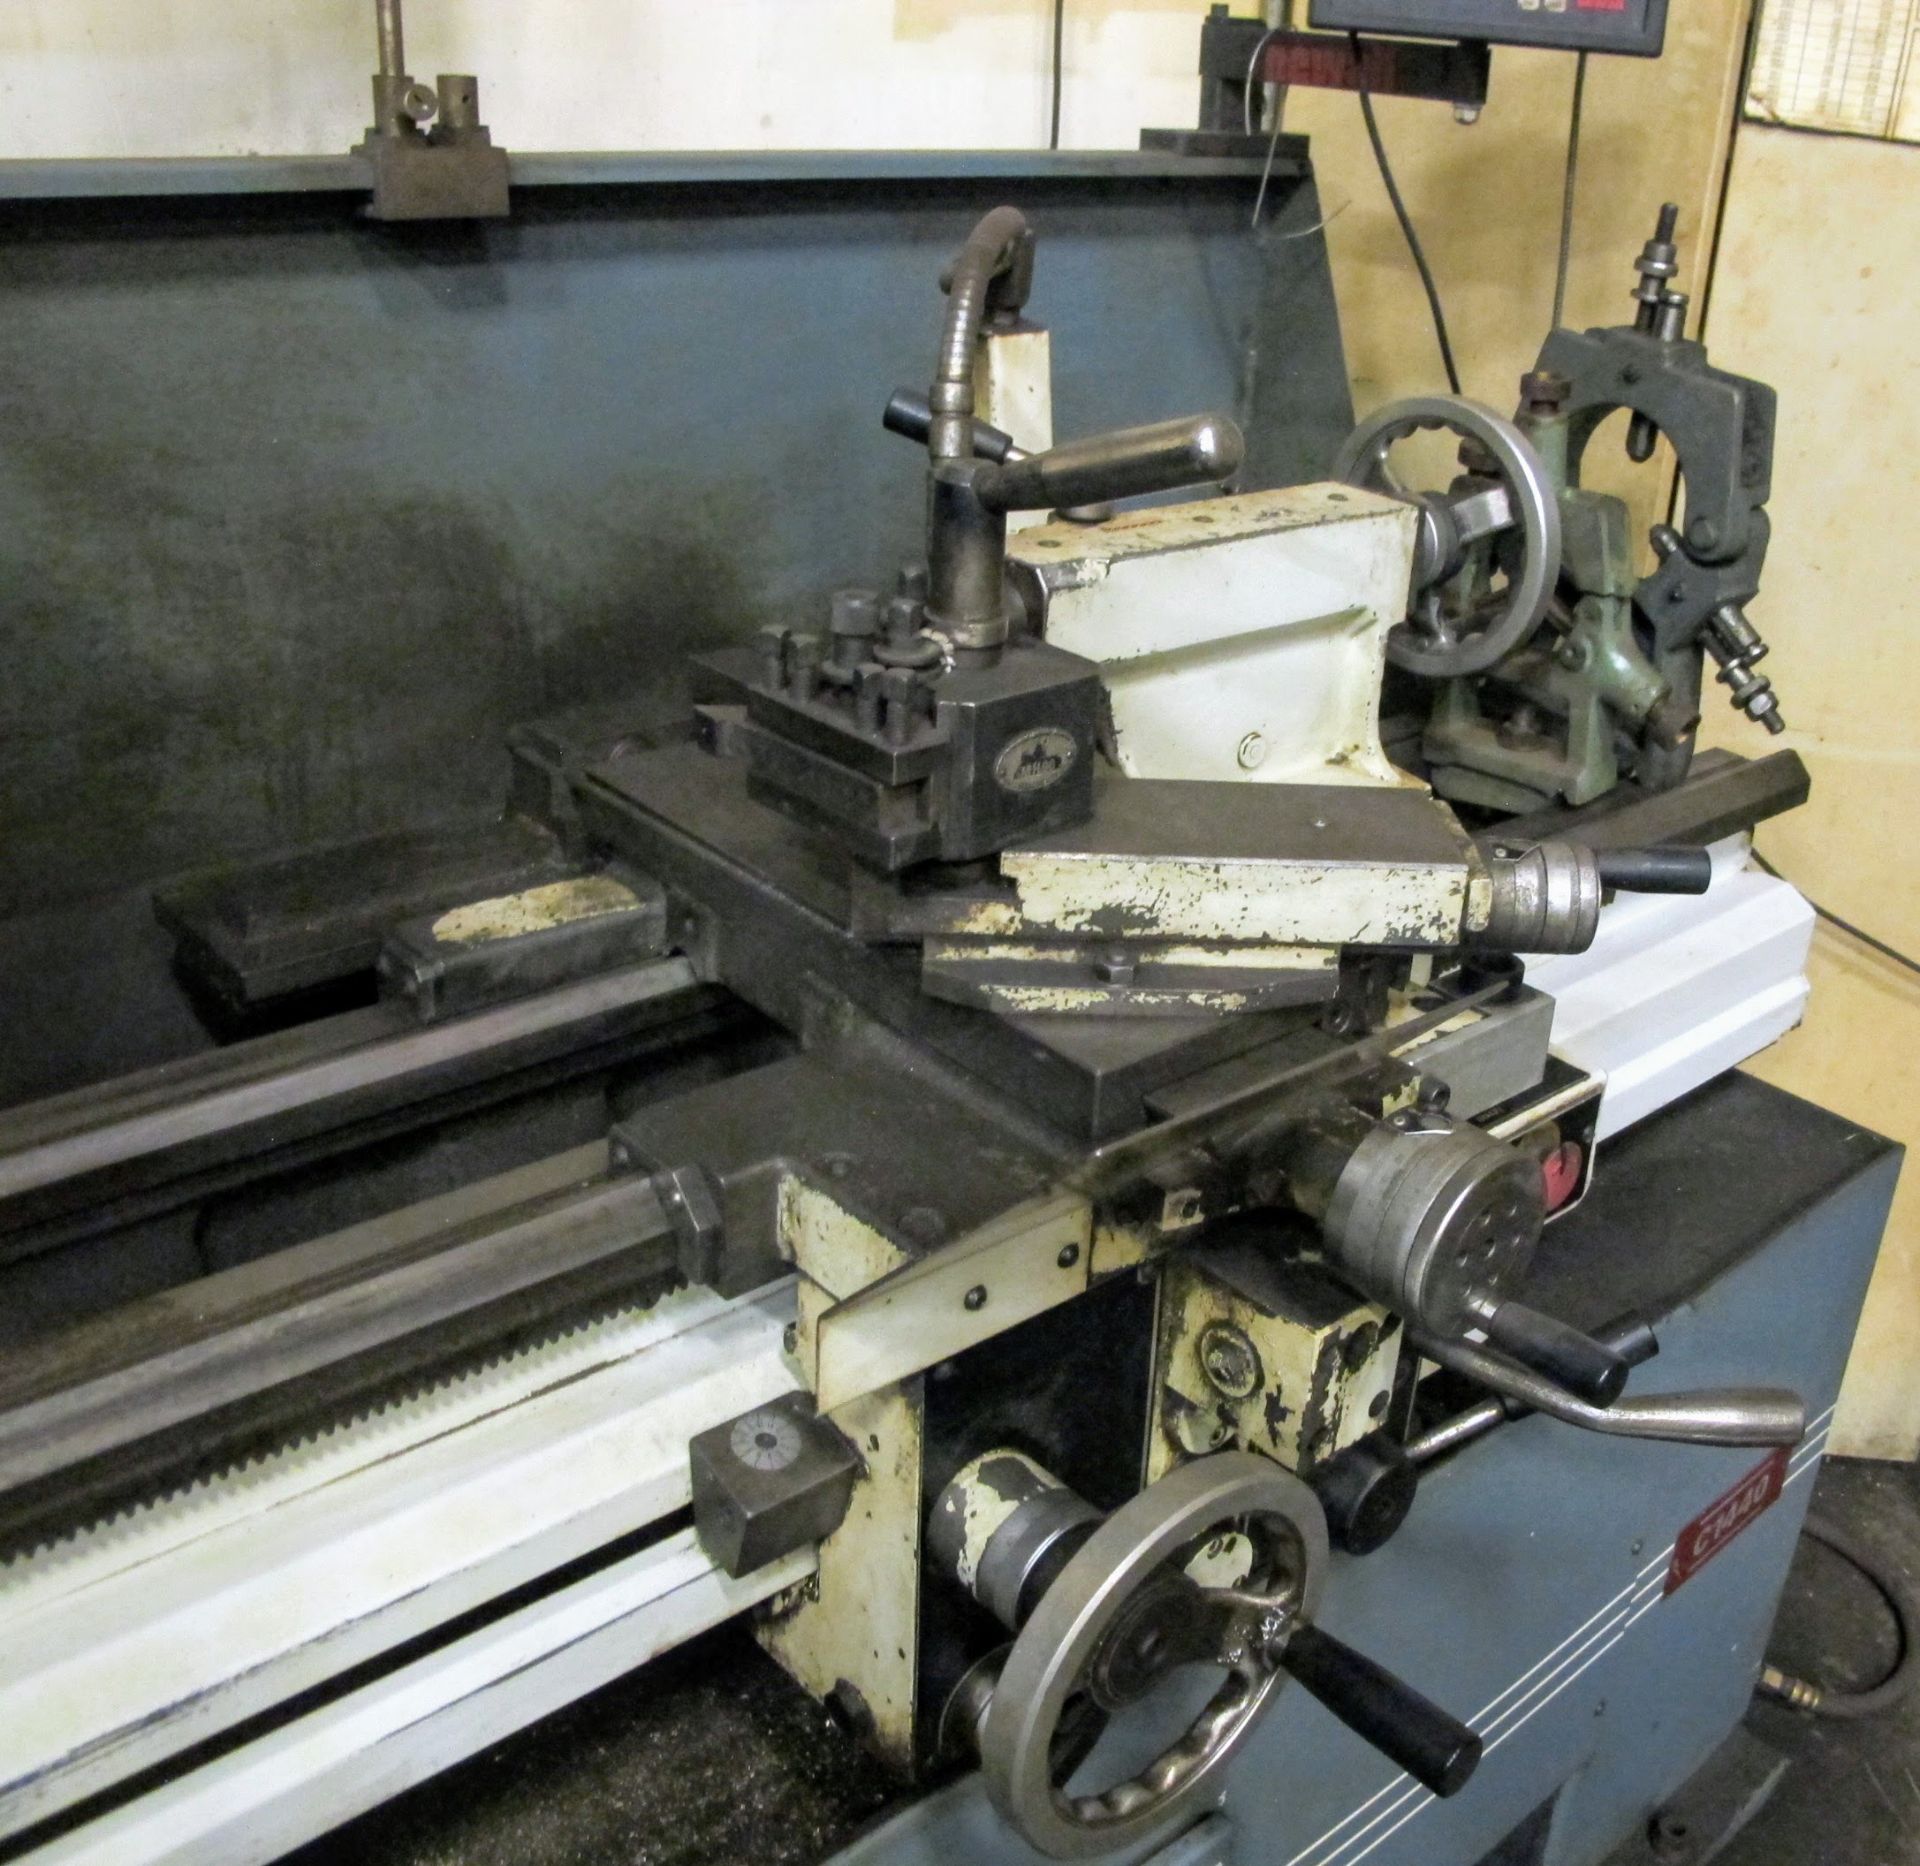 CLAUSING-METOSA C1440 LATHE, 14" SWING X 40" BETWEEN CENTERS, NEWALL 2-AXIS DRO, 8" 3-JAW CHUCK, 1. - Image 5 of 11